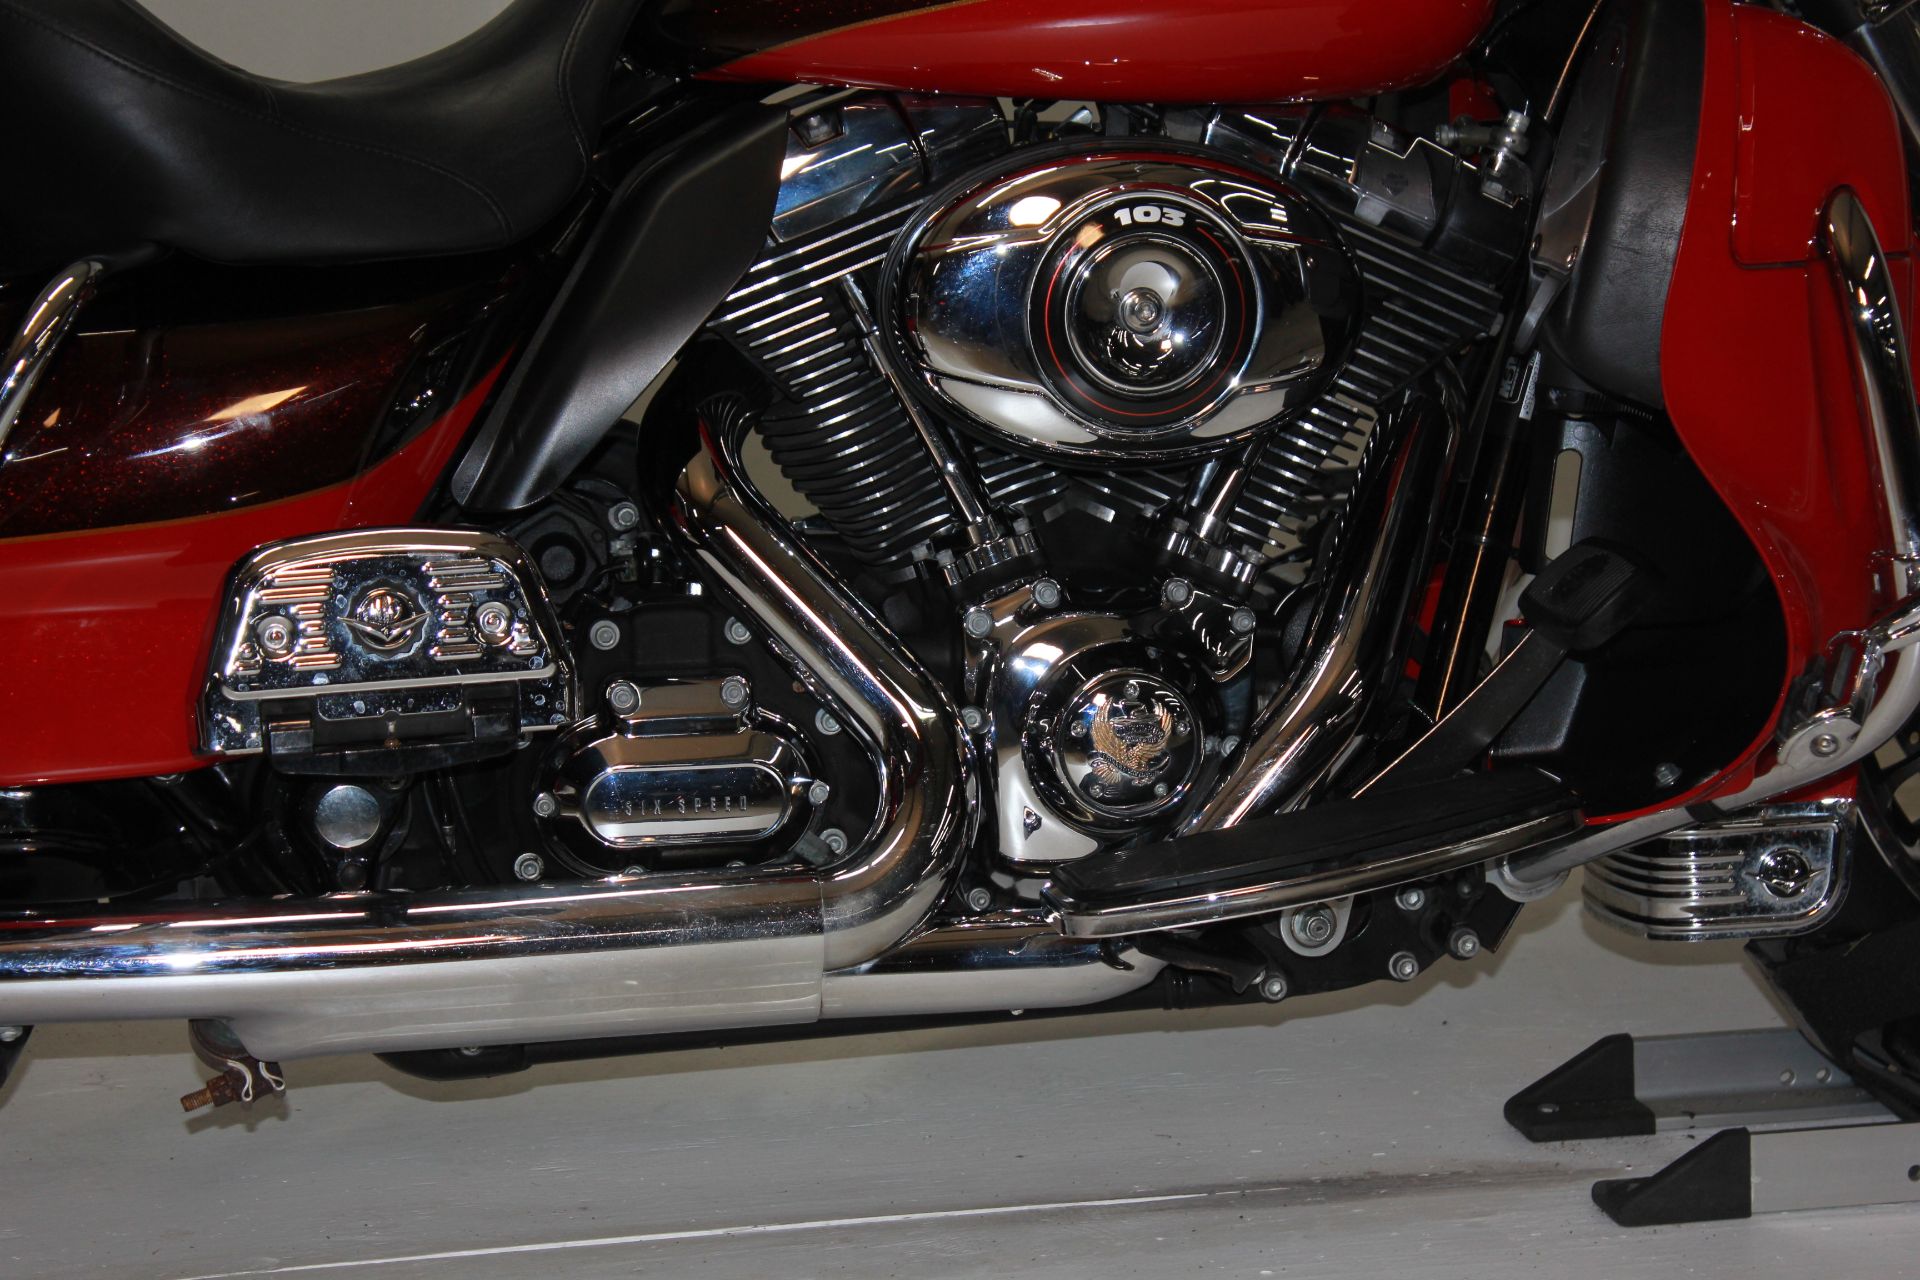 2010 Harley-Davidson Electra Glide® Ultra Limited in Pittsfield, Massachusetts - Photo 15